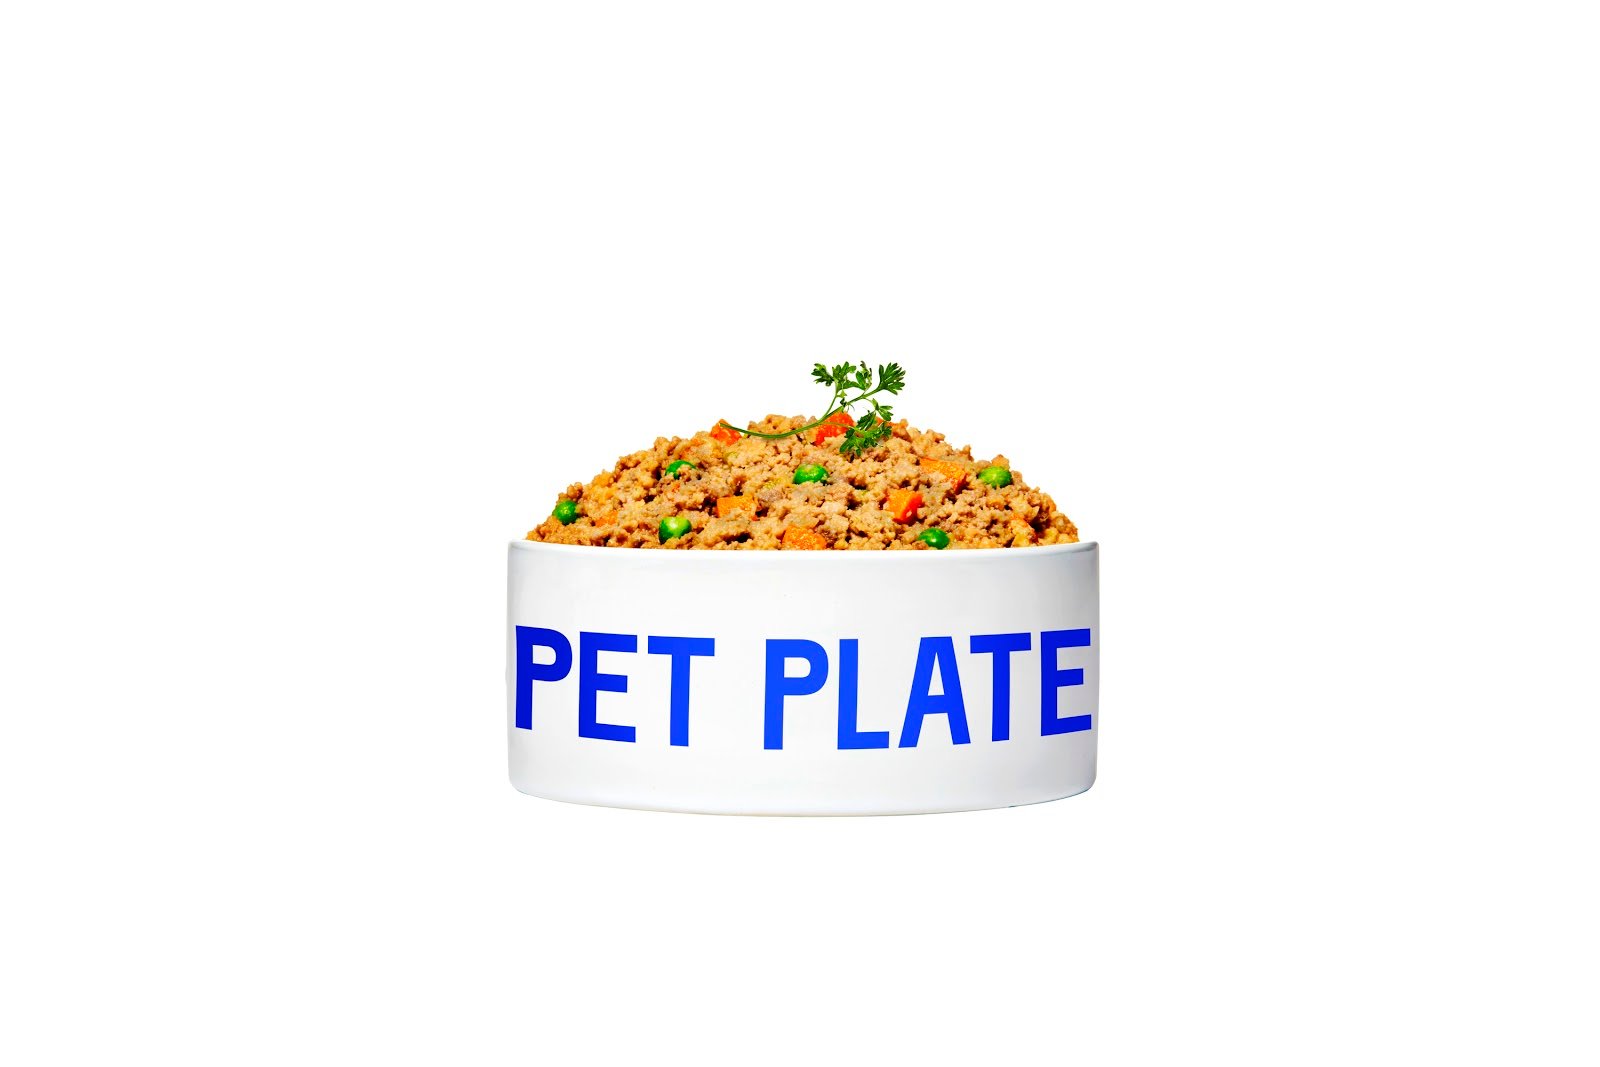 on-starting-a-pet-food-company-shipping-10m-meals-to-pet-parents